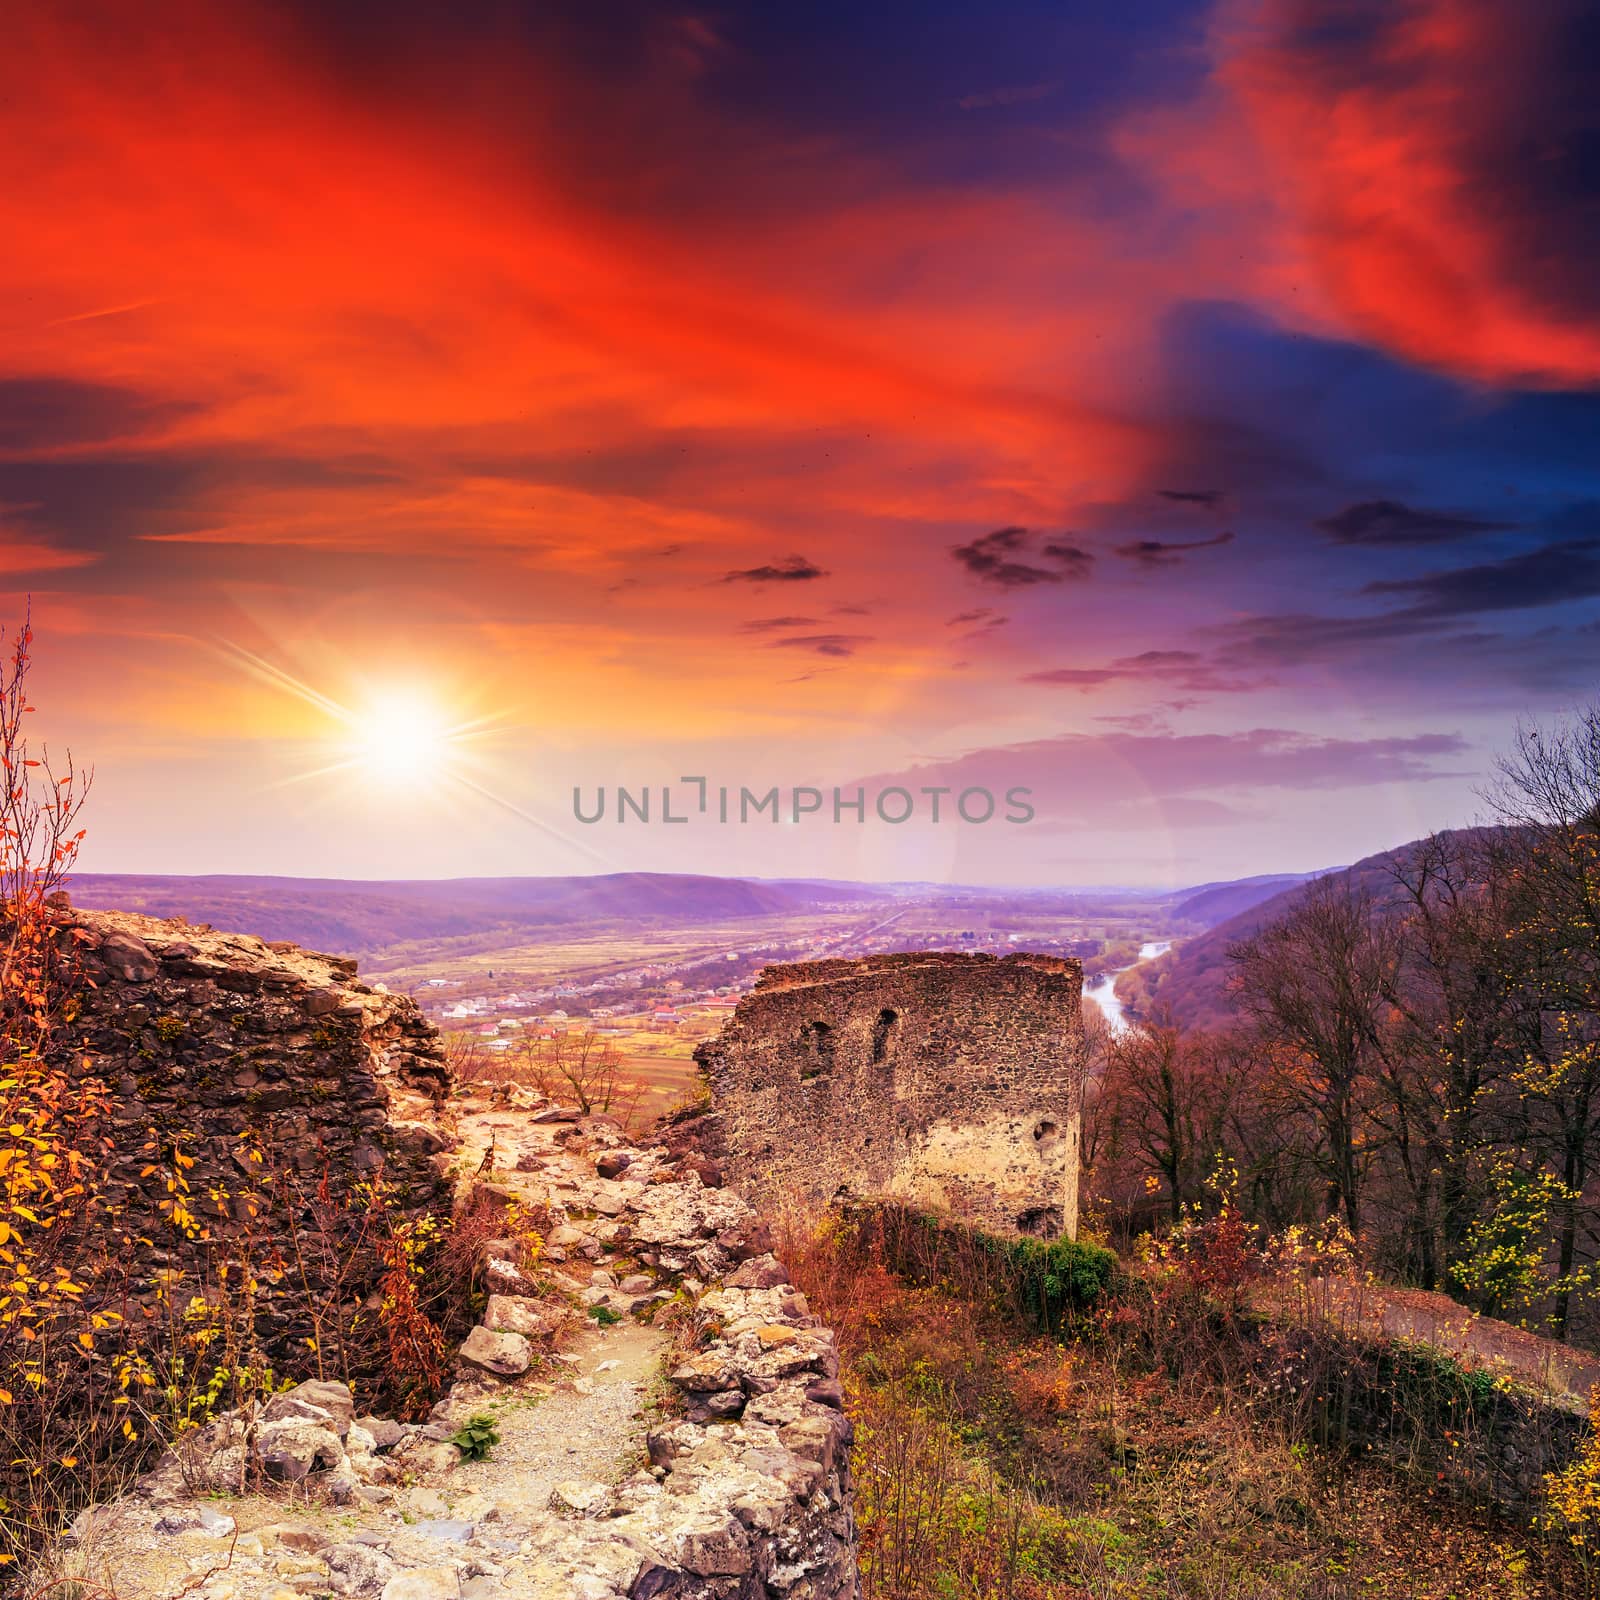 Stone wall of an old ruined castle in the mountains at sunset